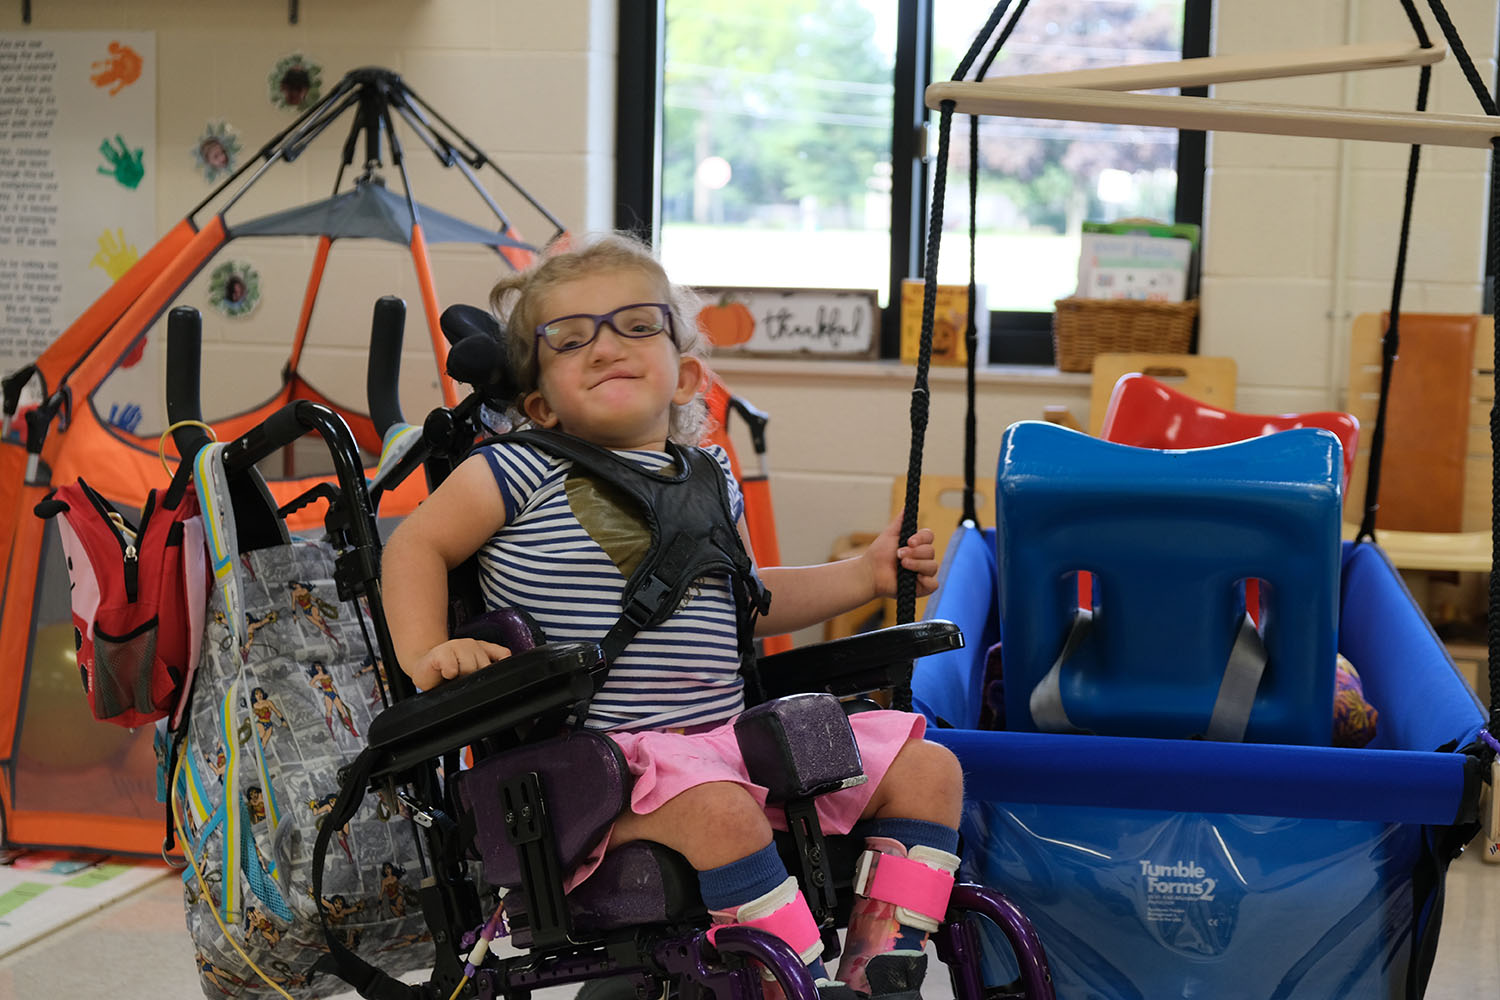 Girl in wheelchair with backpack smiling